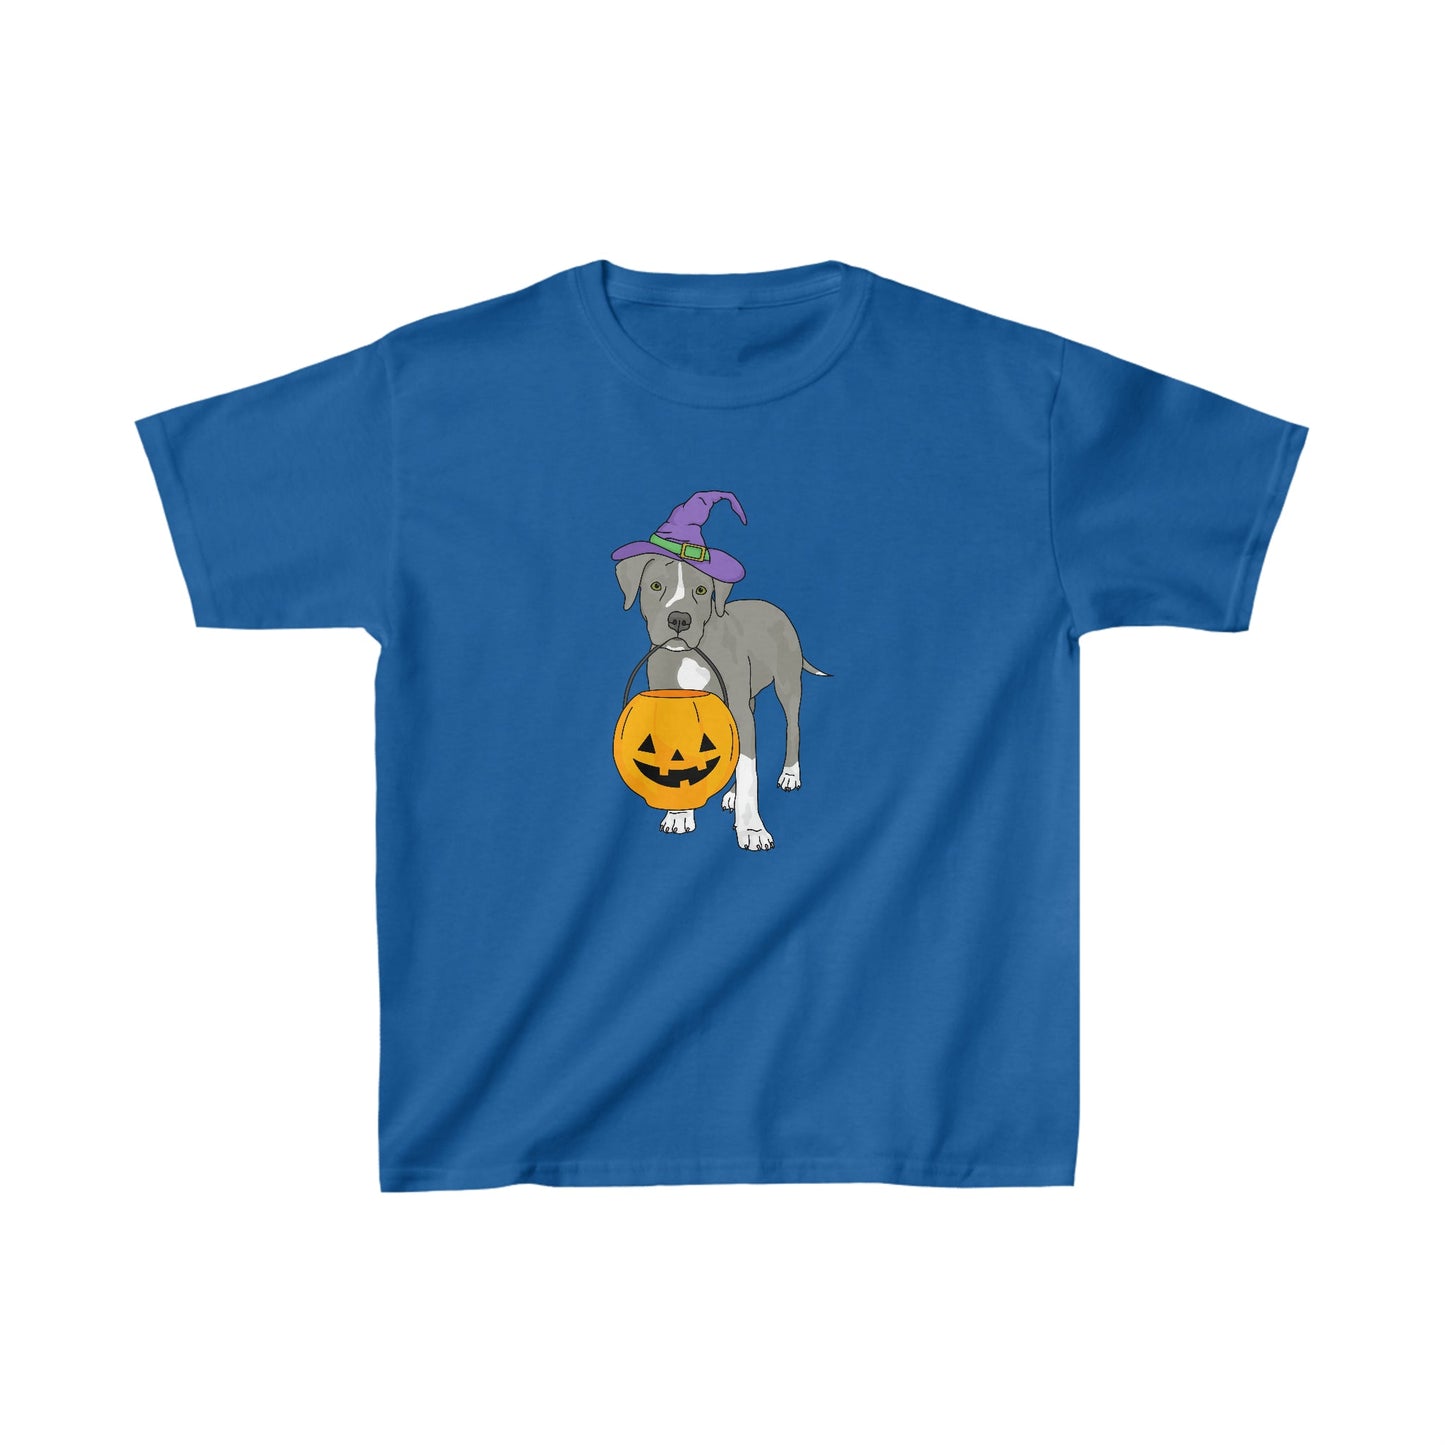 Witchy Puppy | **YOUTH SIZE** Tee - Detezi Designs-22521740057224994050